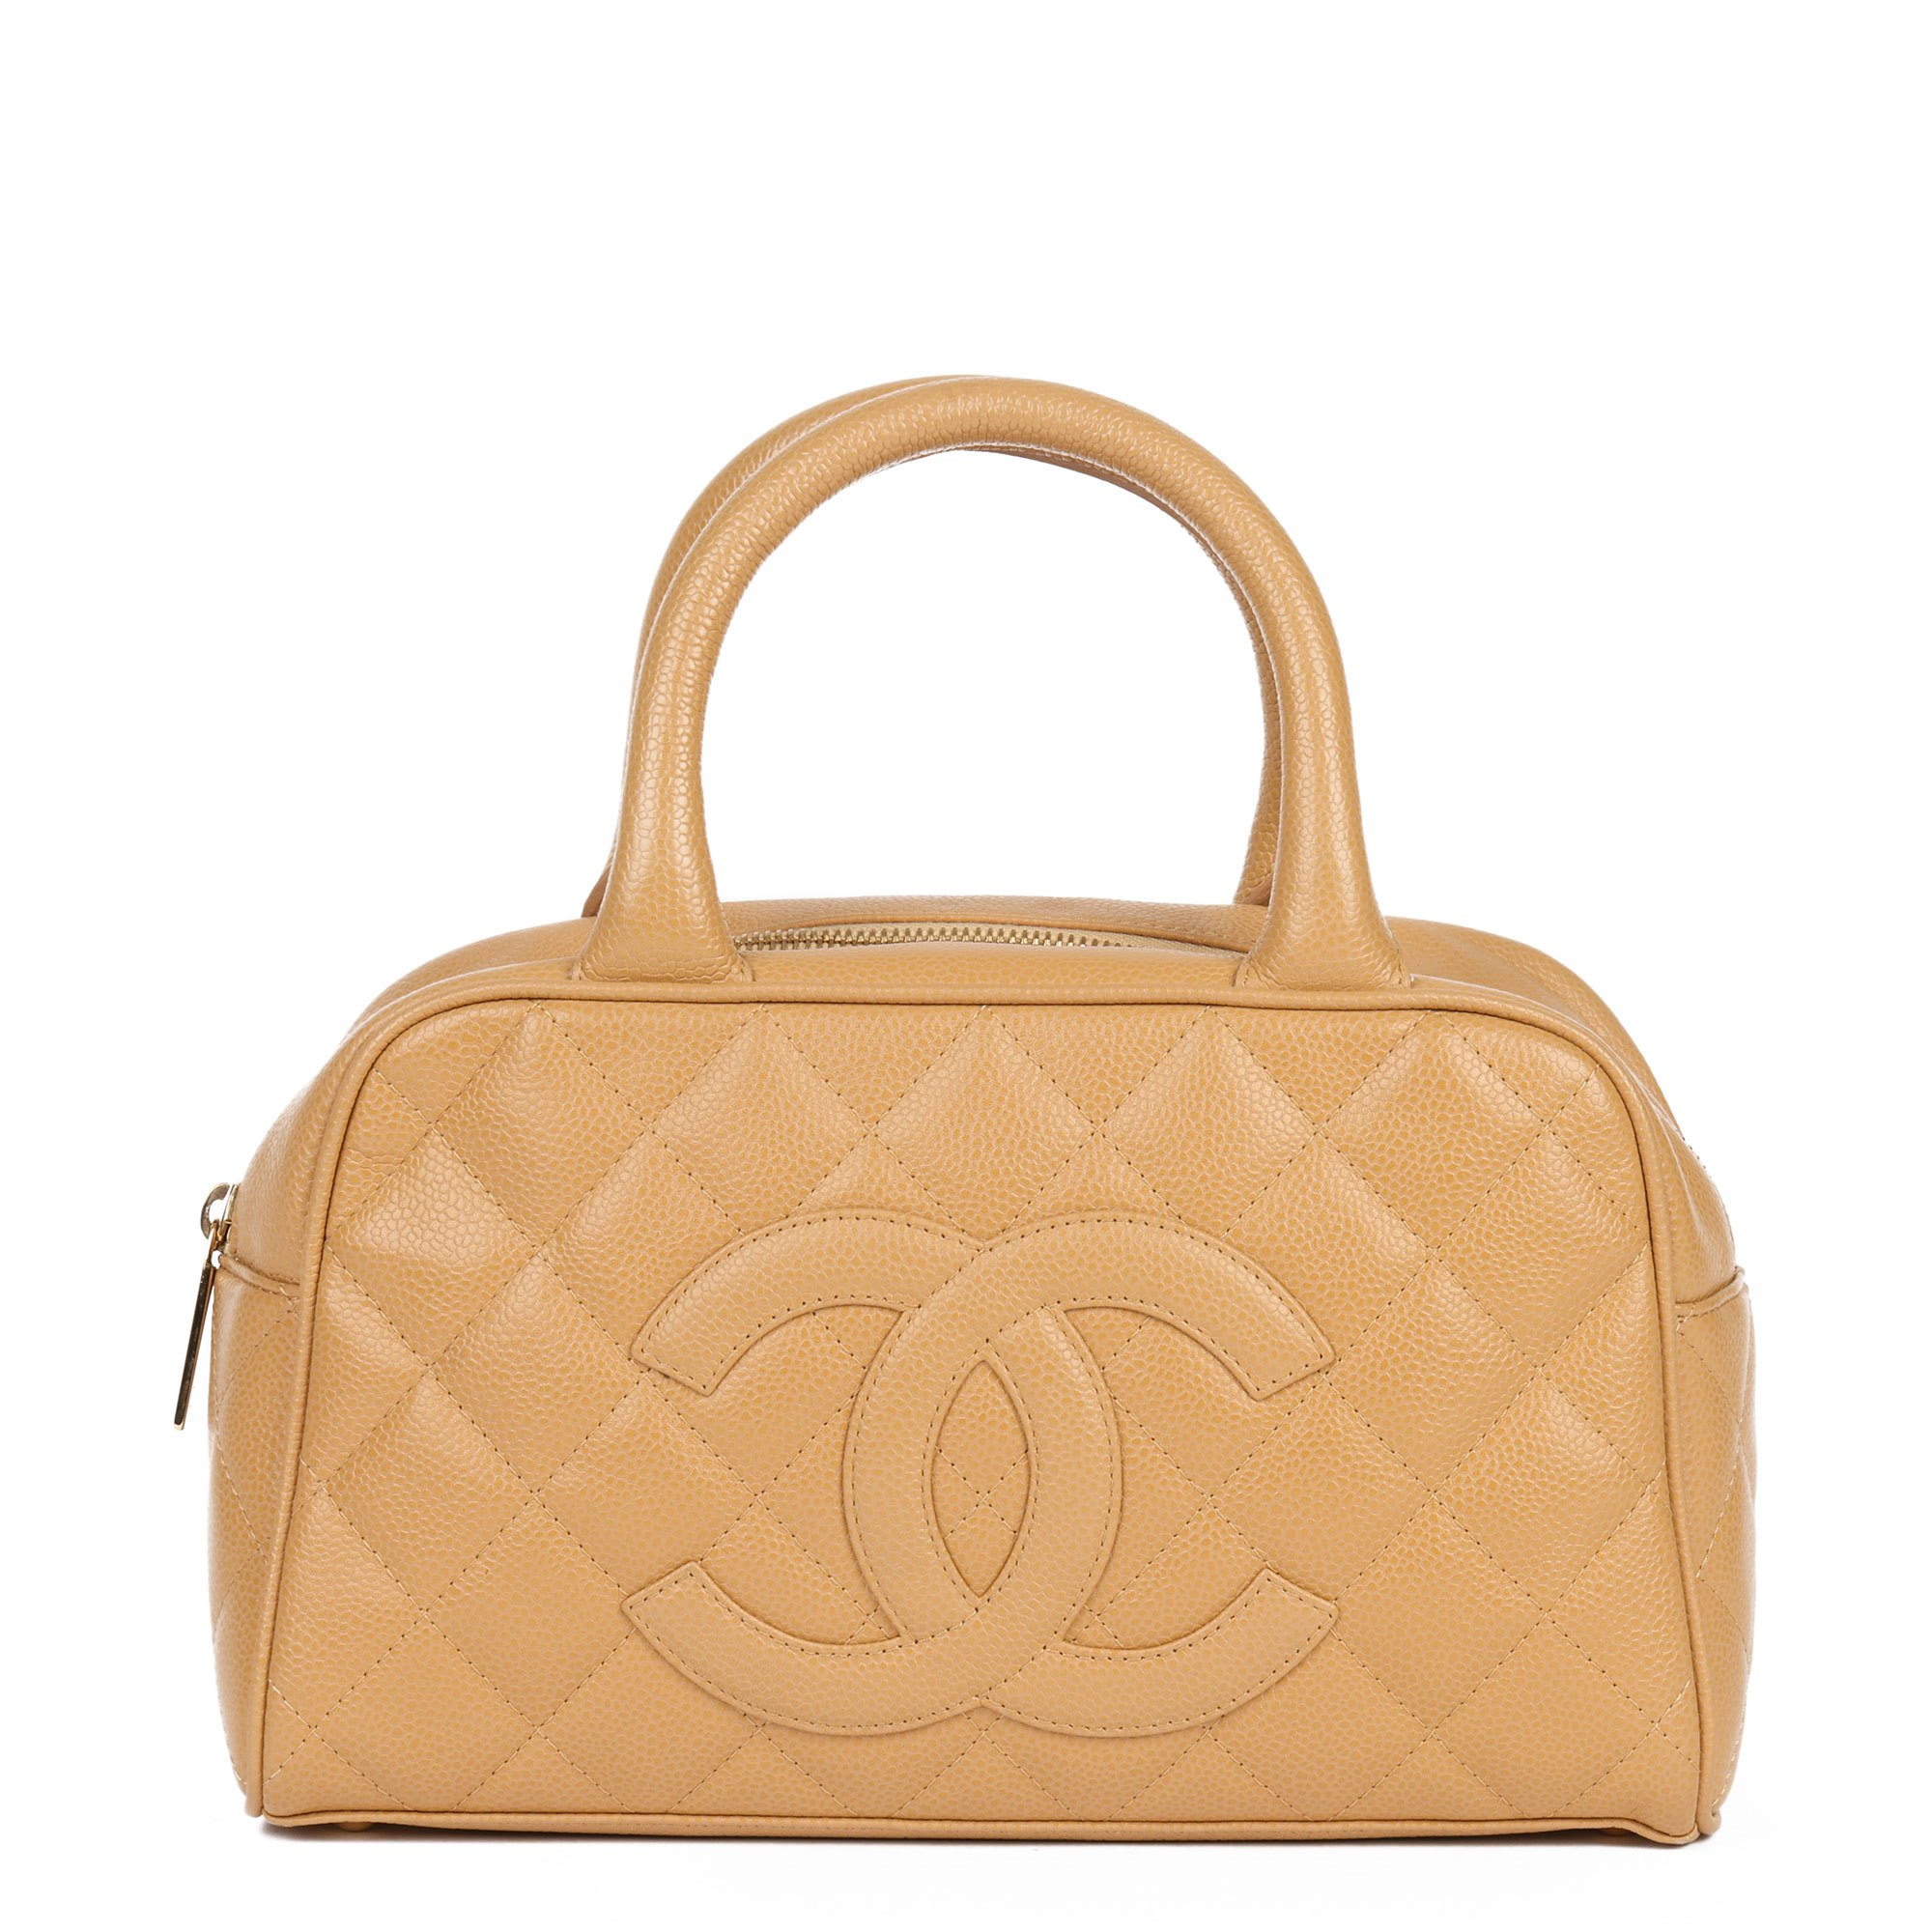 Chanel Beige Quilted Caviar Leather Mini Boston